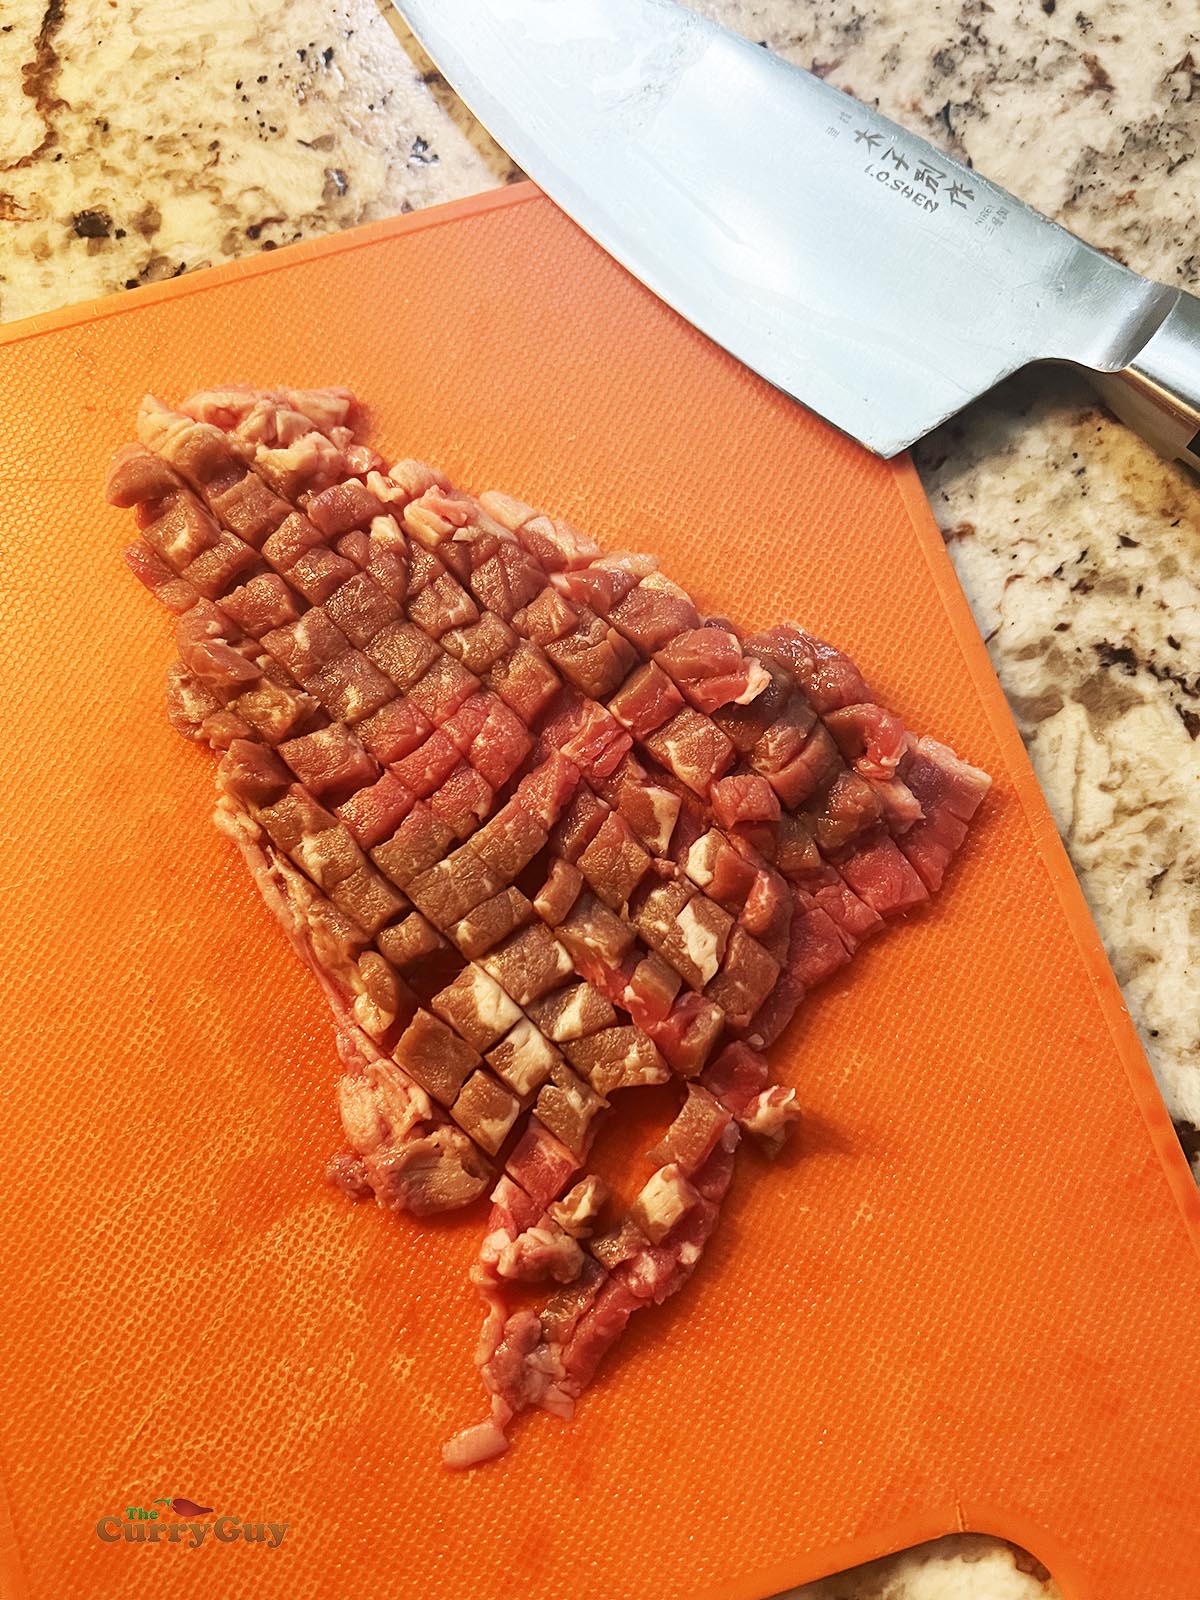 Meat cut and prepared for frying.